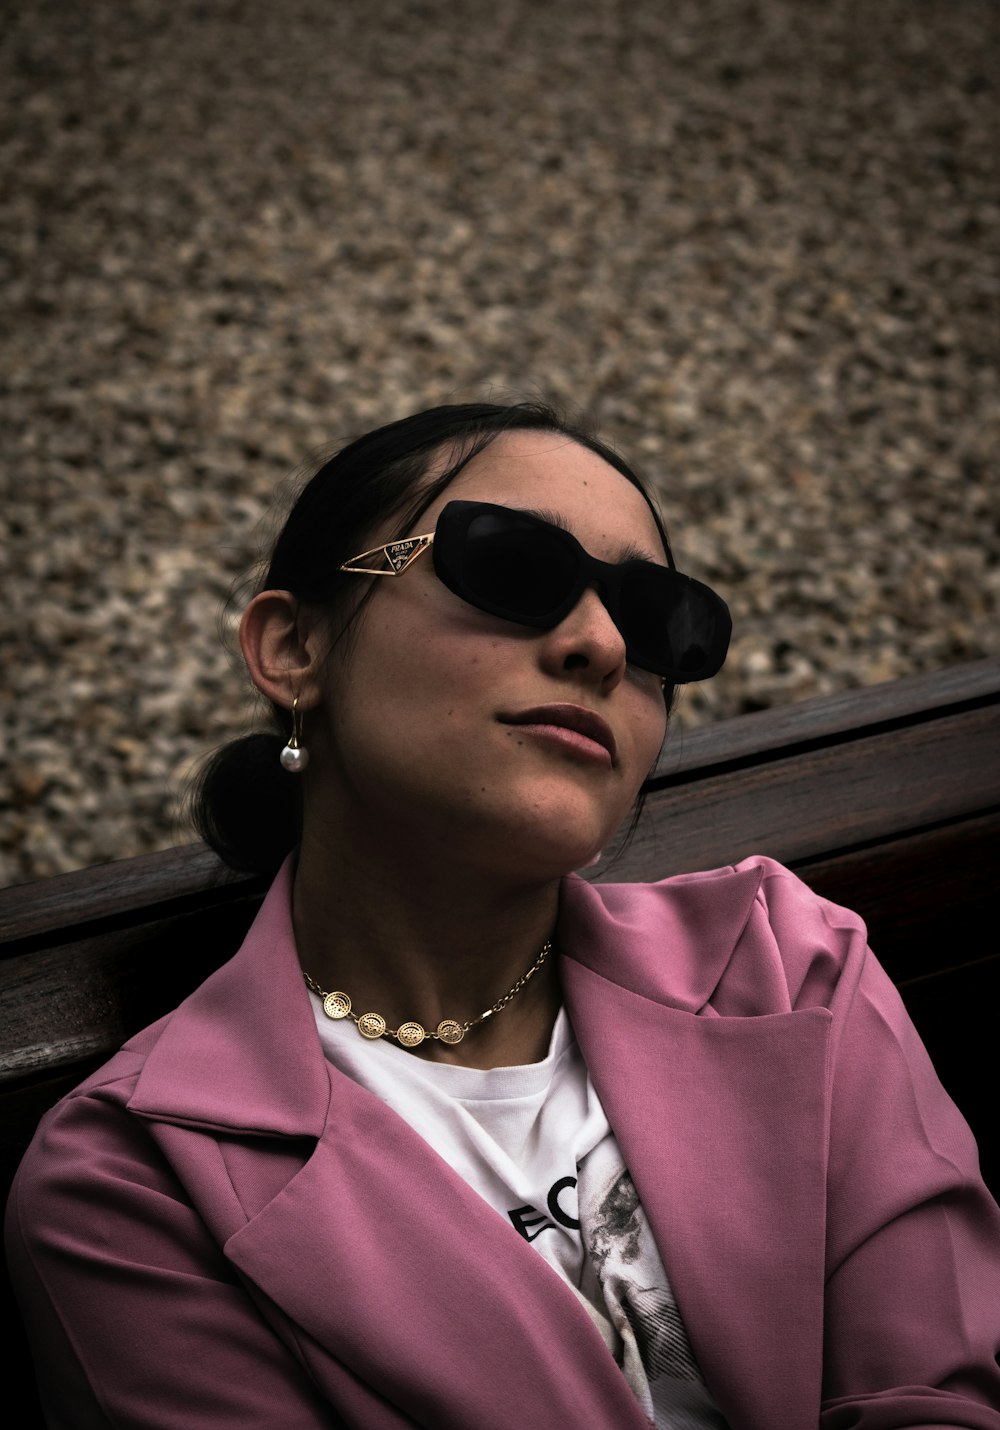 a woman wearing sunglasses and a pink jacket